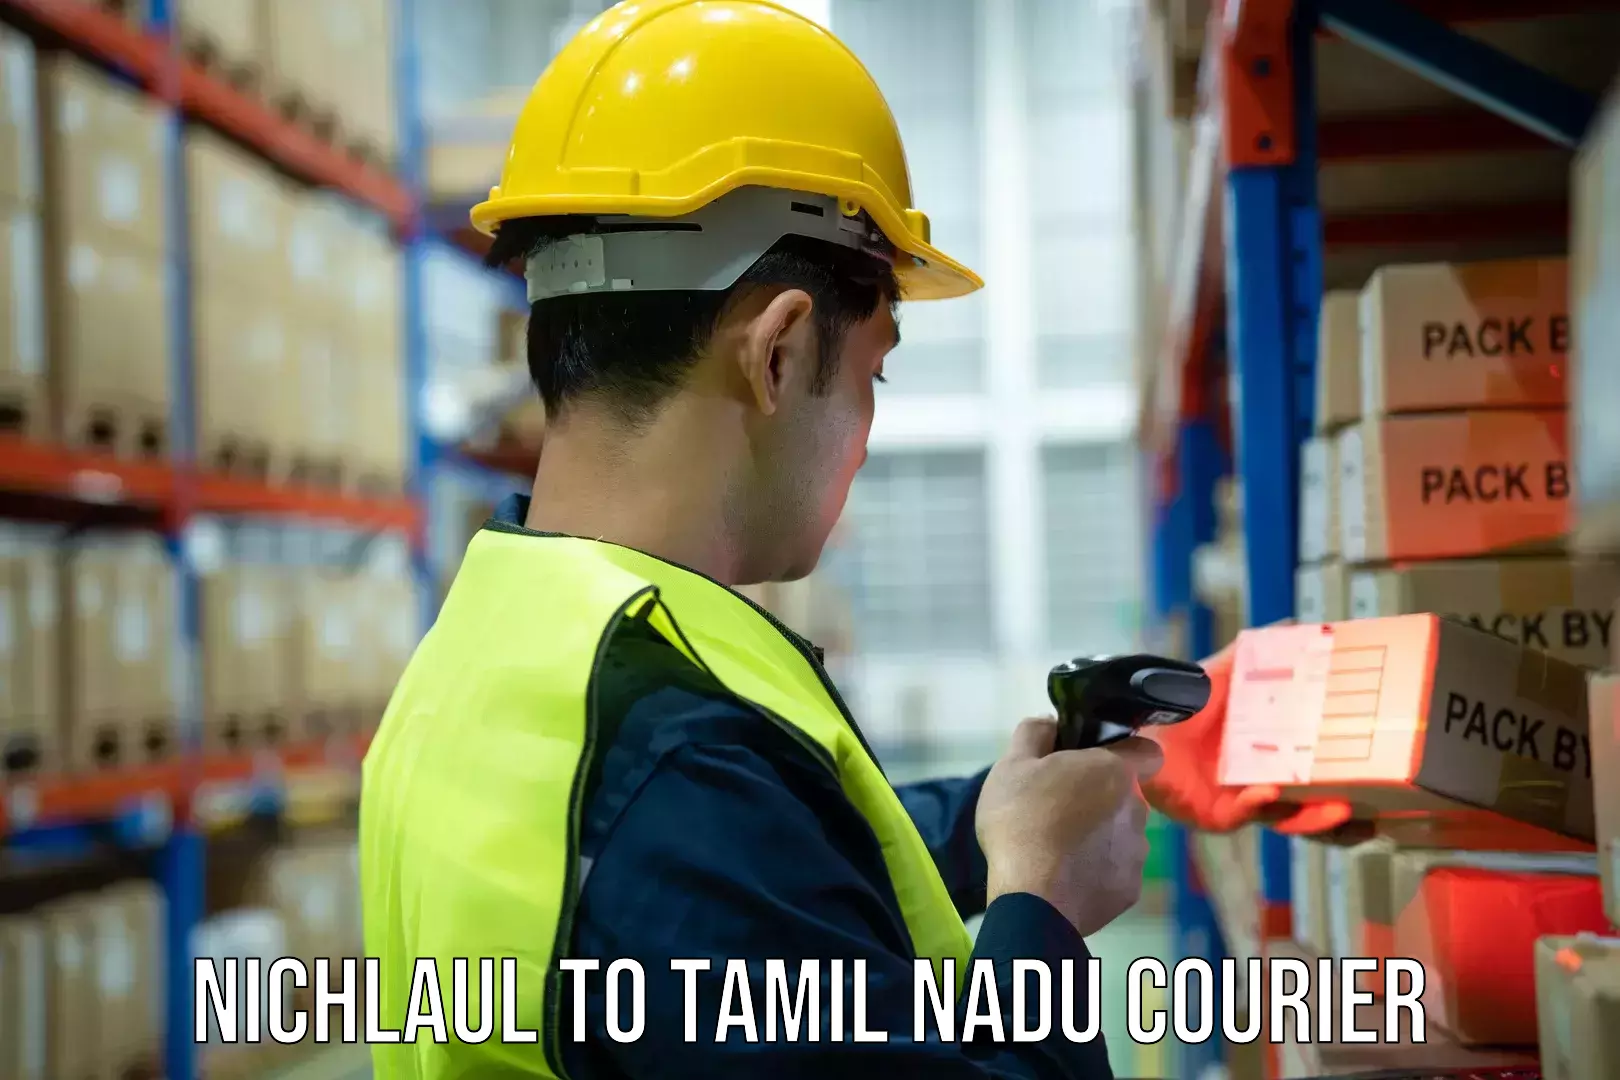 Automated parcel services Nichlaul to Tamil Nadu